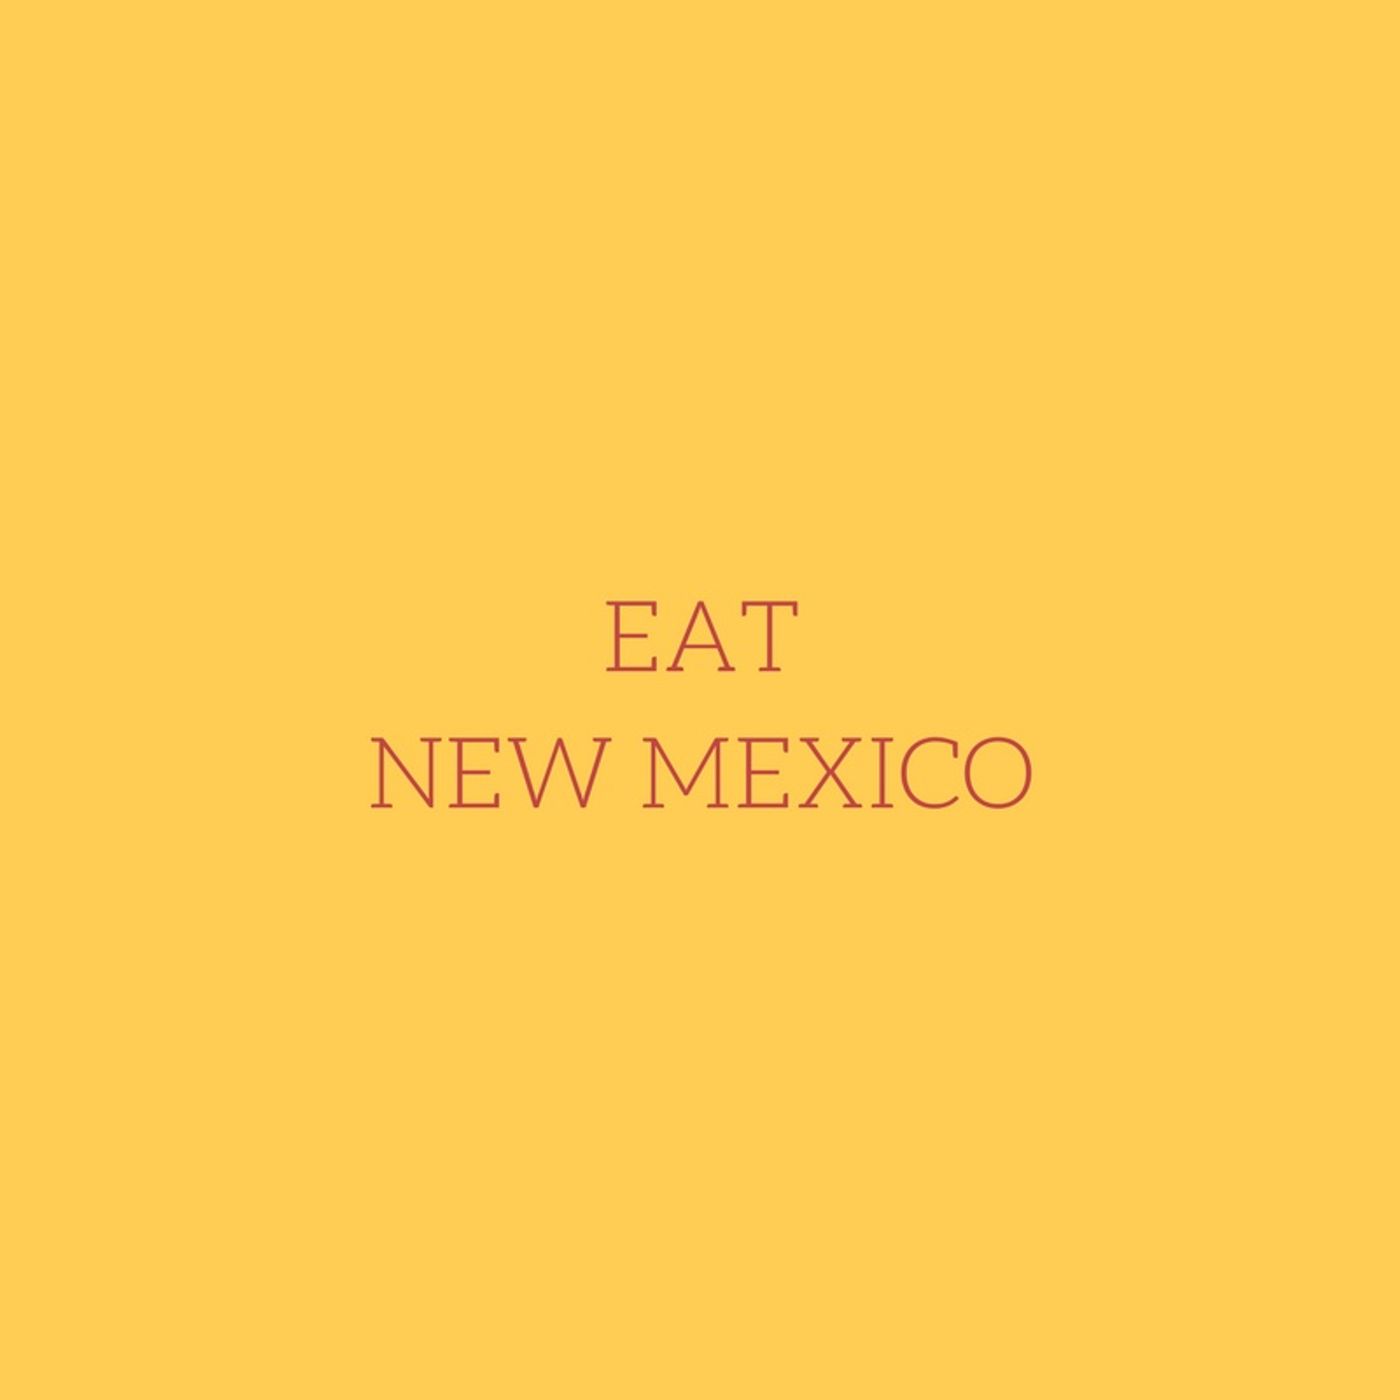 Episode 1: Fat Guy Eats Podcast - Emilee Cantrell of Eat New Mexico